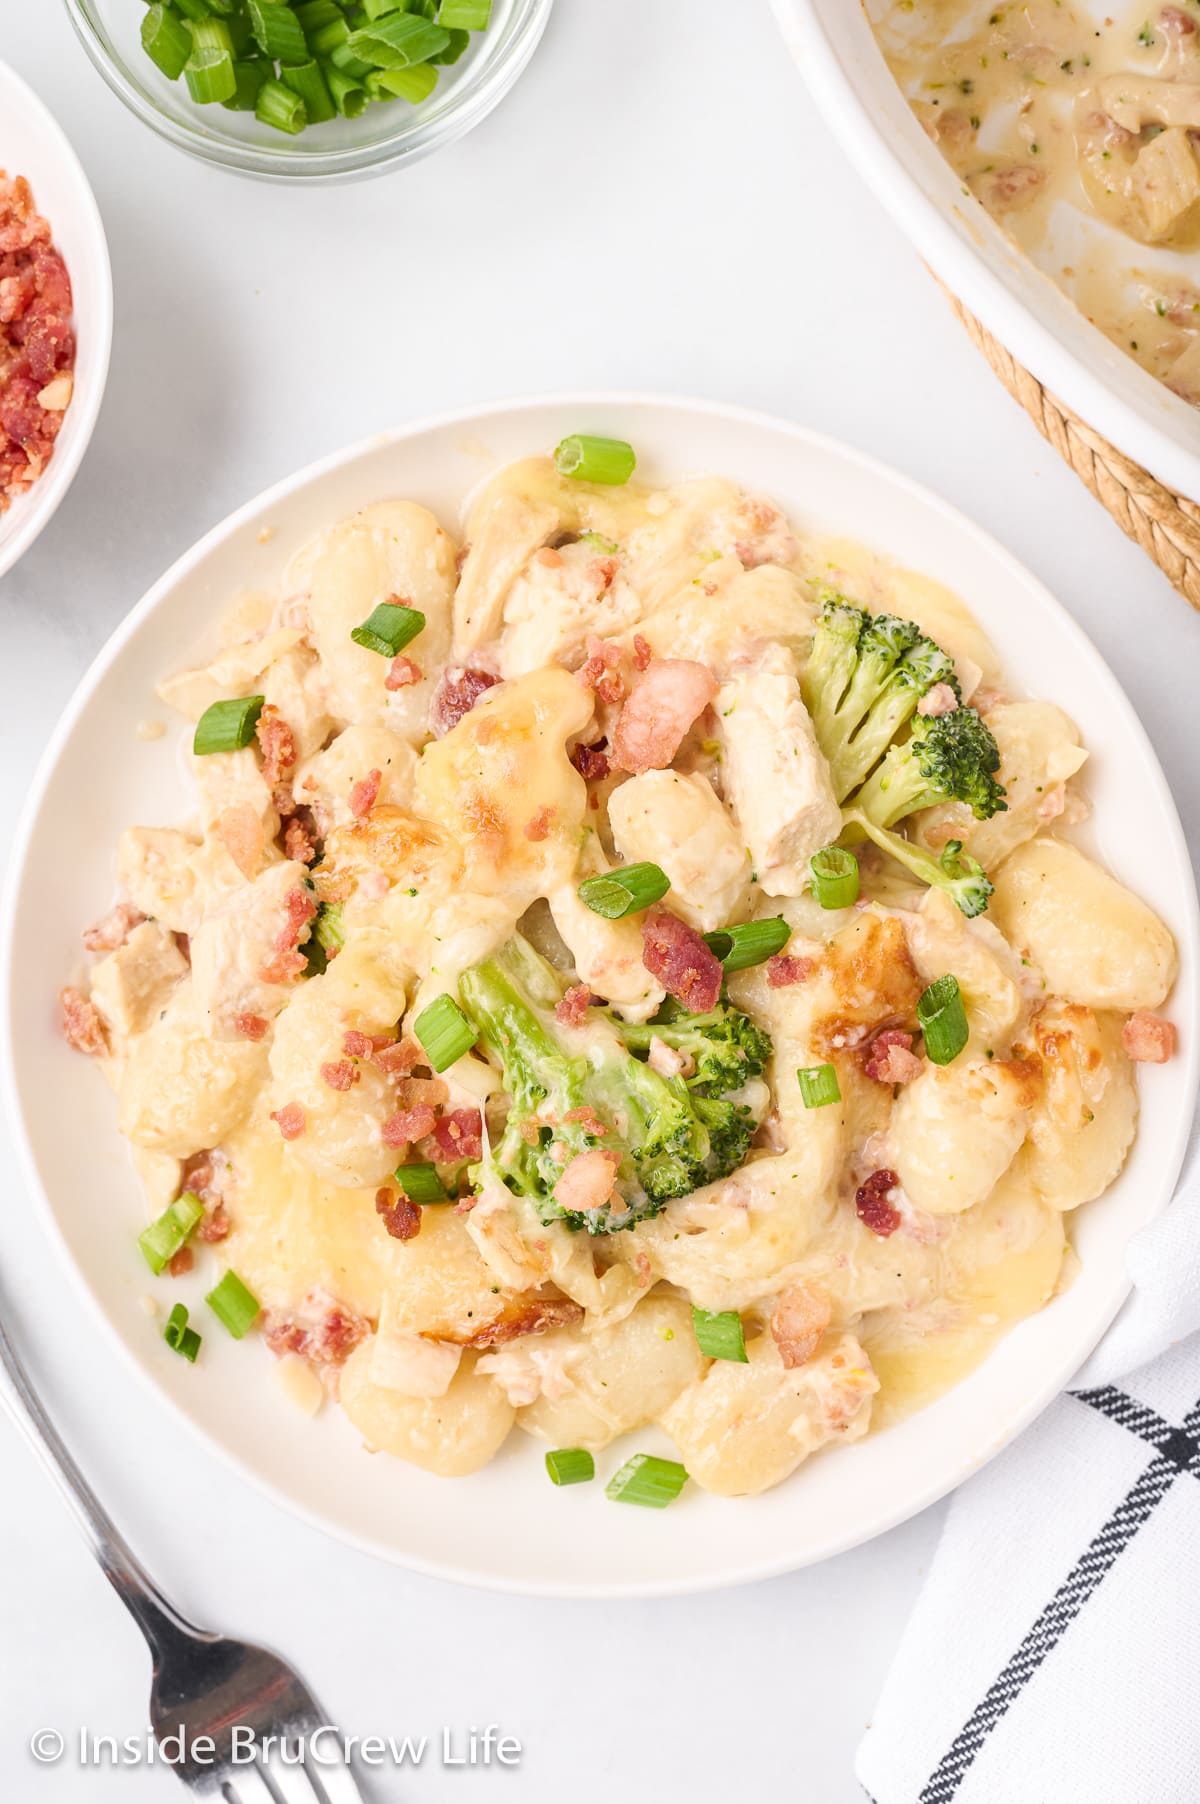 Baked gnocchi with chicken and broccoli on a white plate.